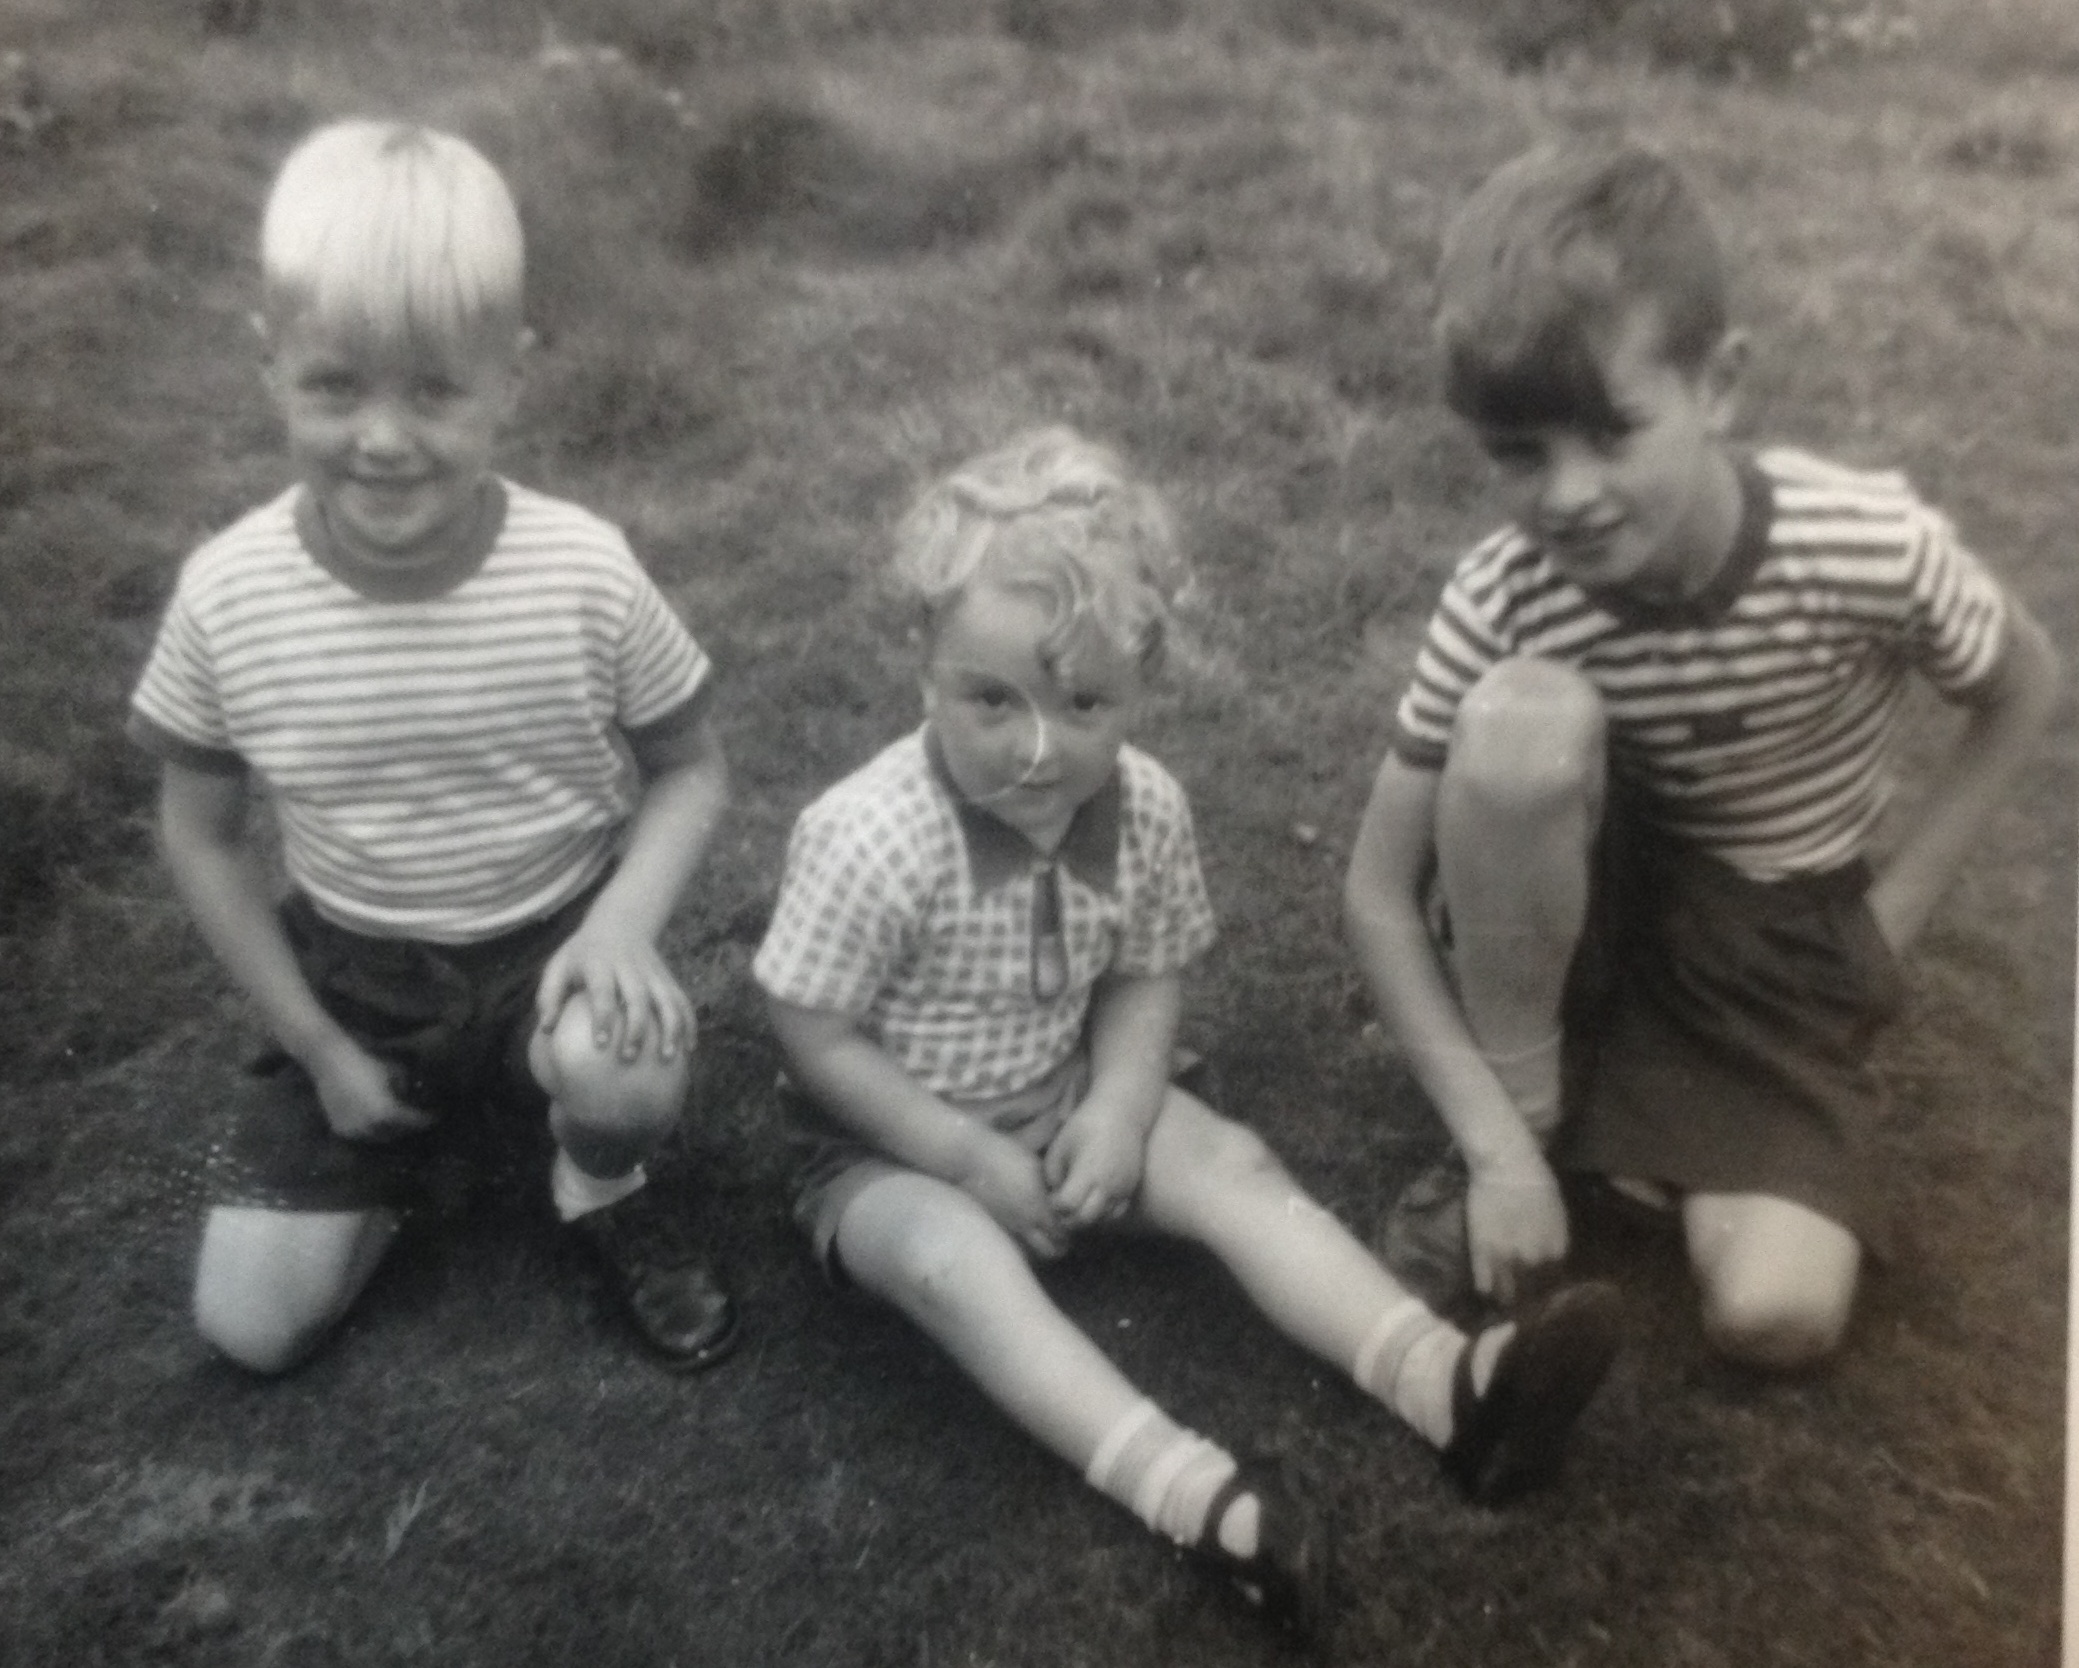 Duncan, Gordon and Peter about 1958